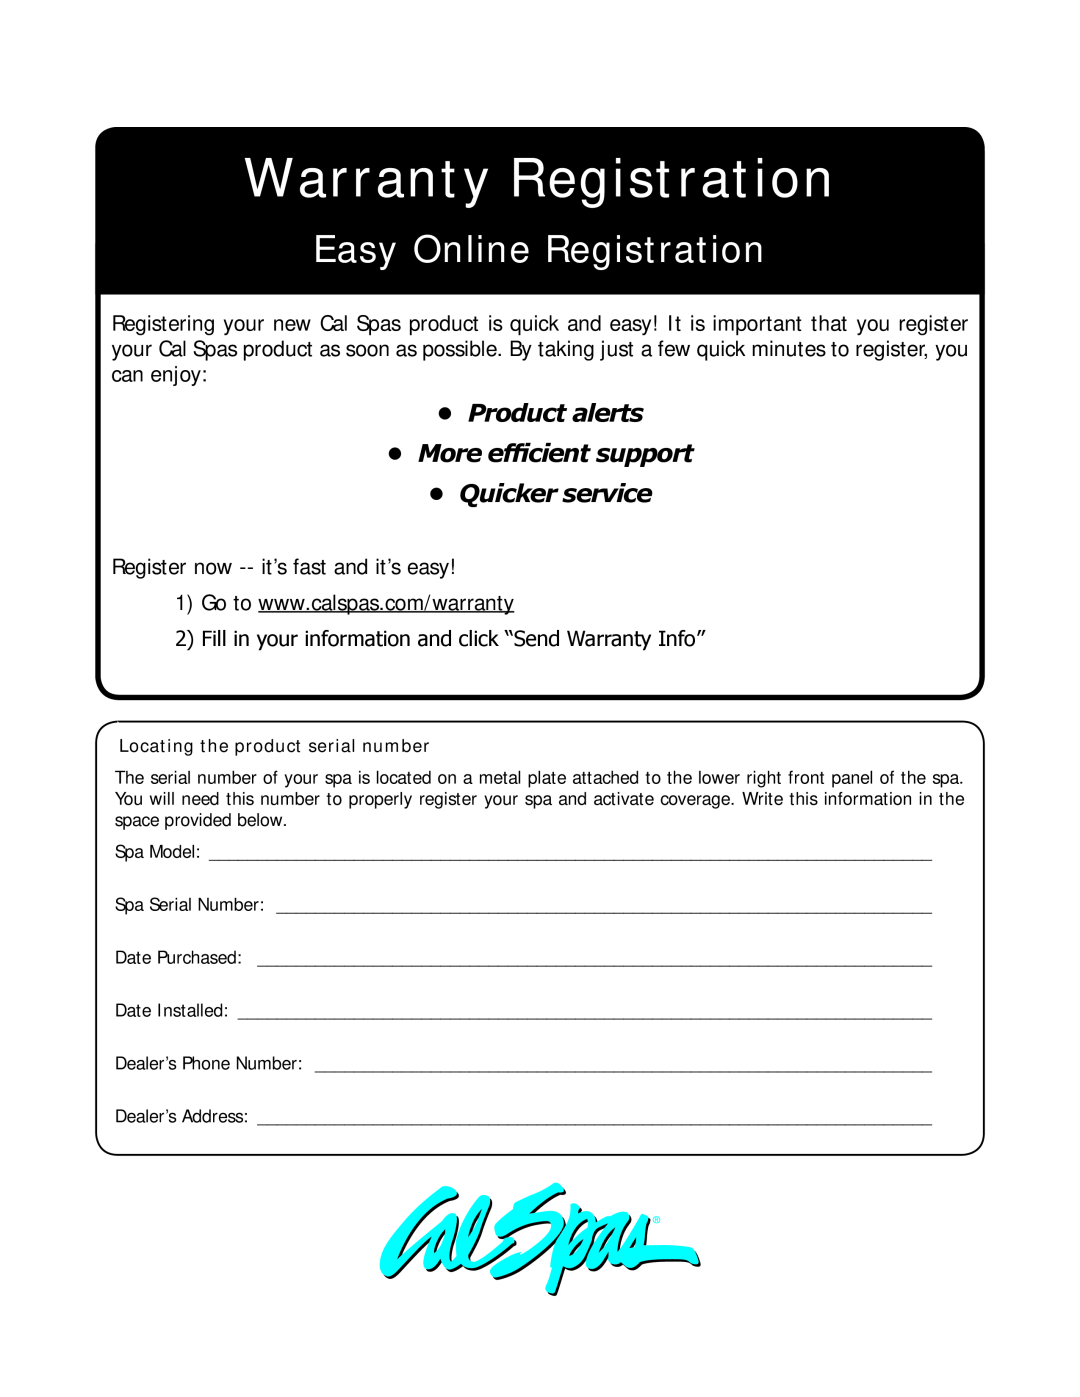 Cal Spas LTR20101000 Register now --it’s fast and it’s easy, Locating the product serial number, Warranty Registration 